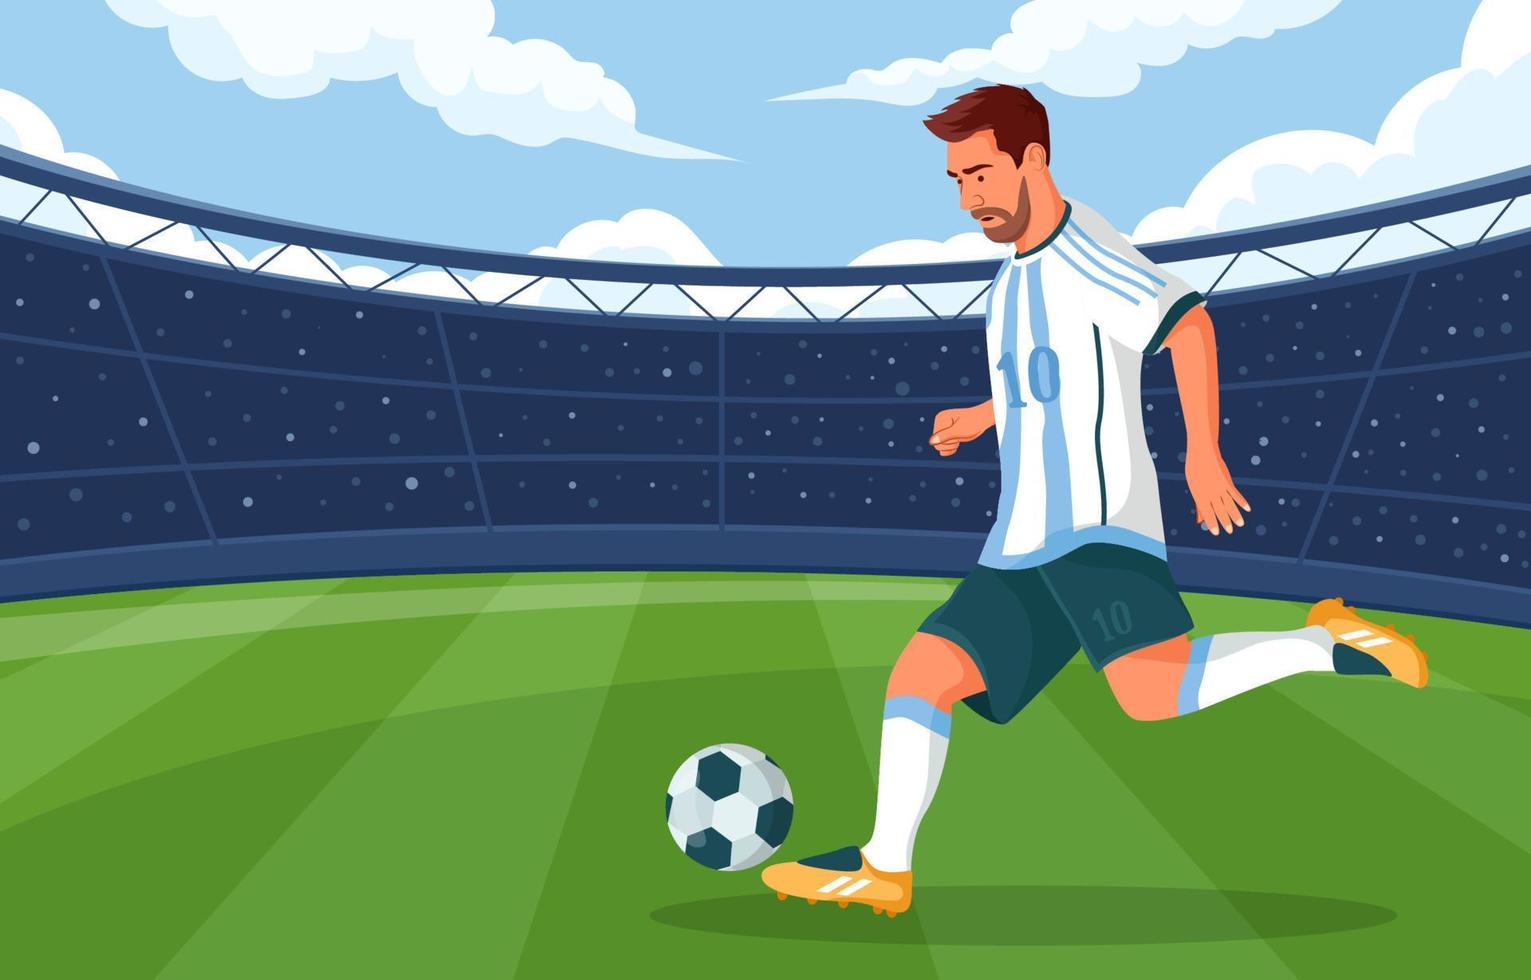 Football Player in Action Background vector